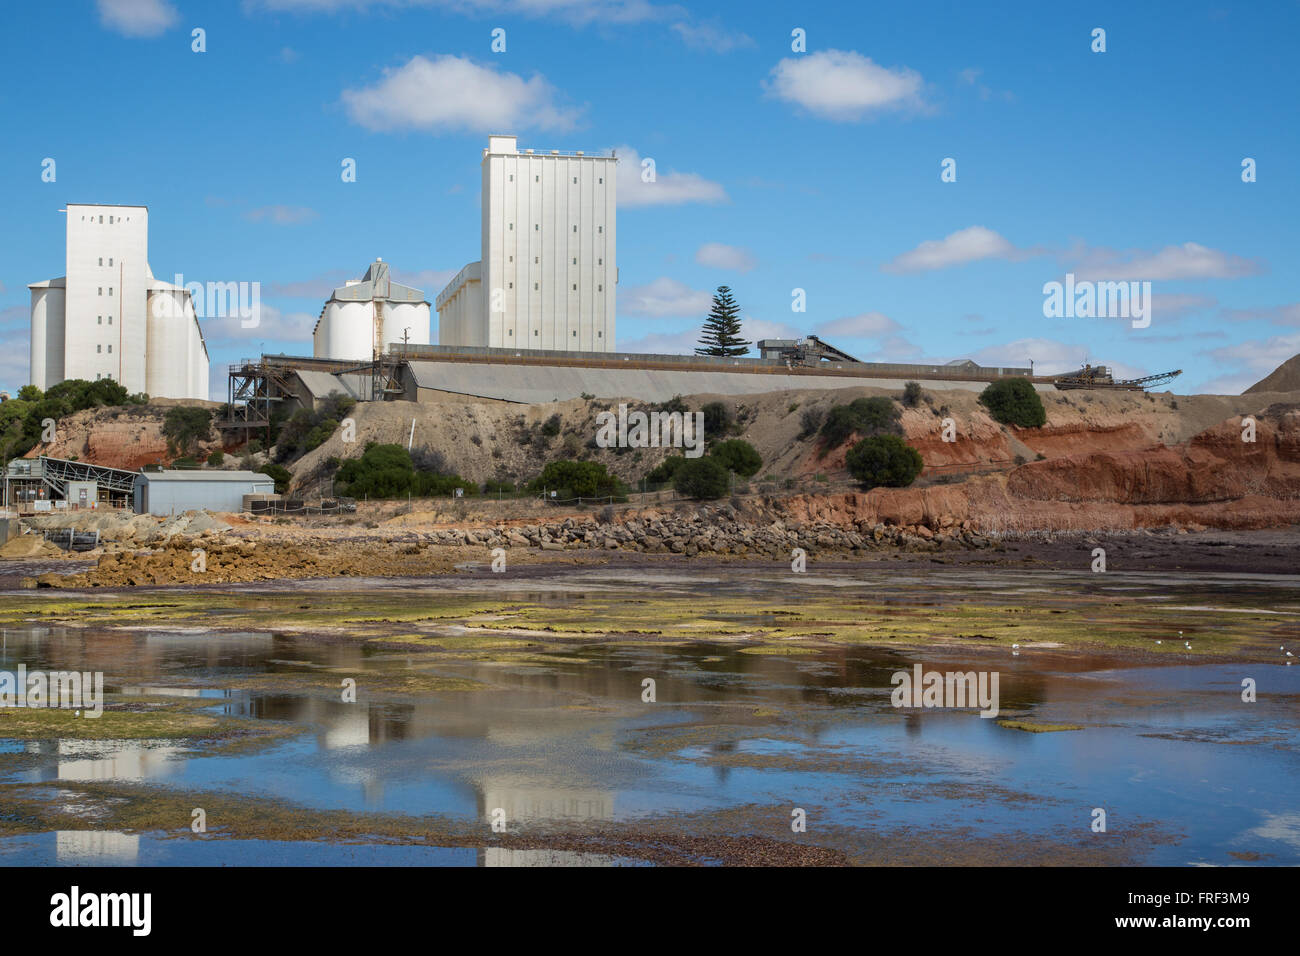 white crop storage silo facilities on top of sea shore with reflections in shallow water with mud and seaweed Stock Photo